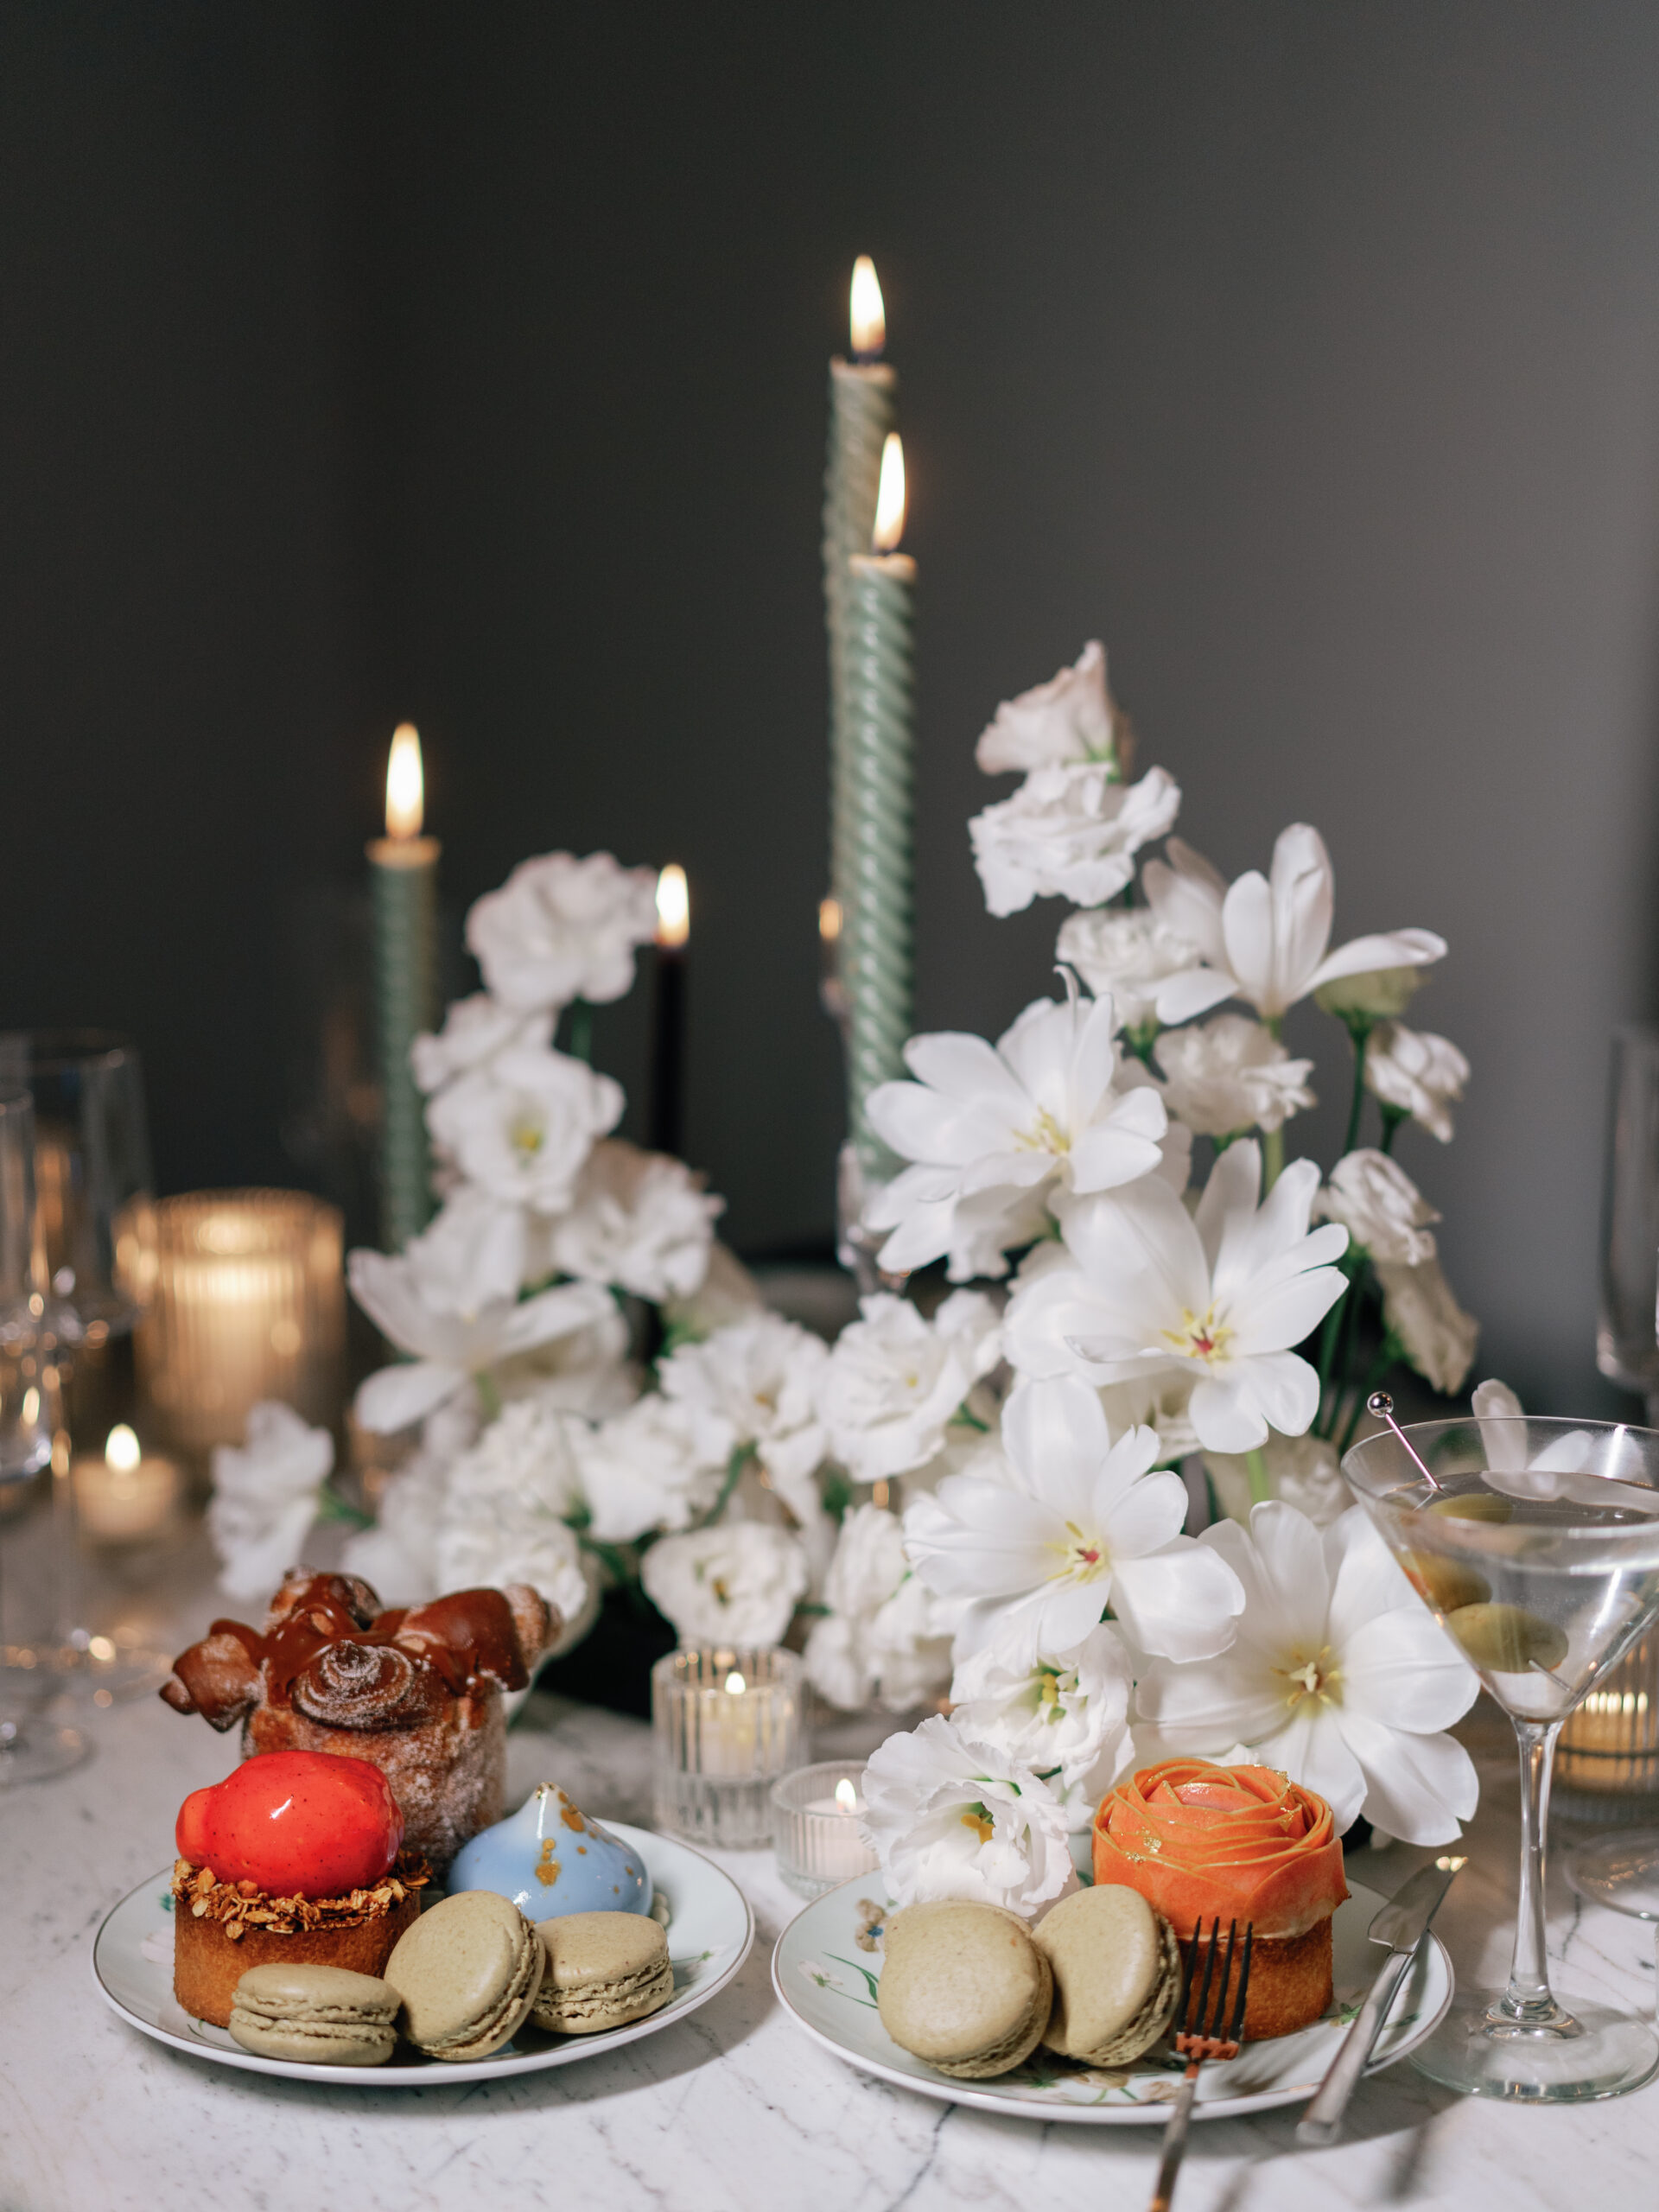 White floral centerpiece with sage green candles on a marble table with pastries and macarons.